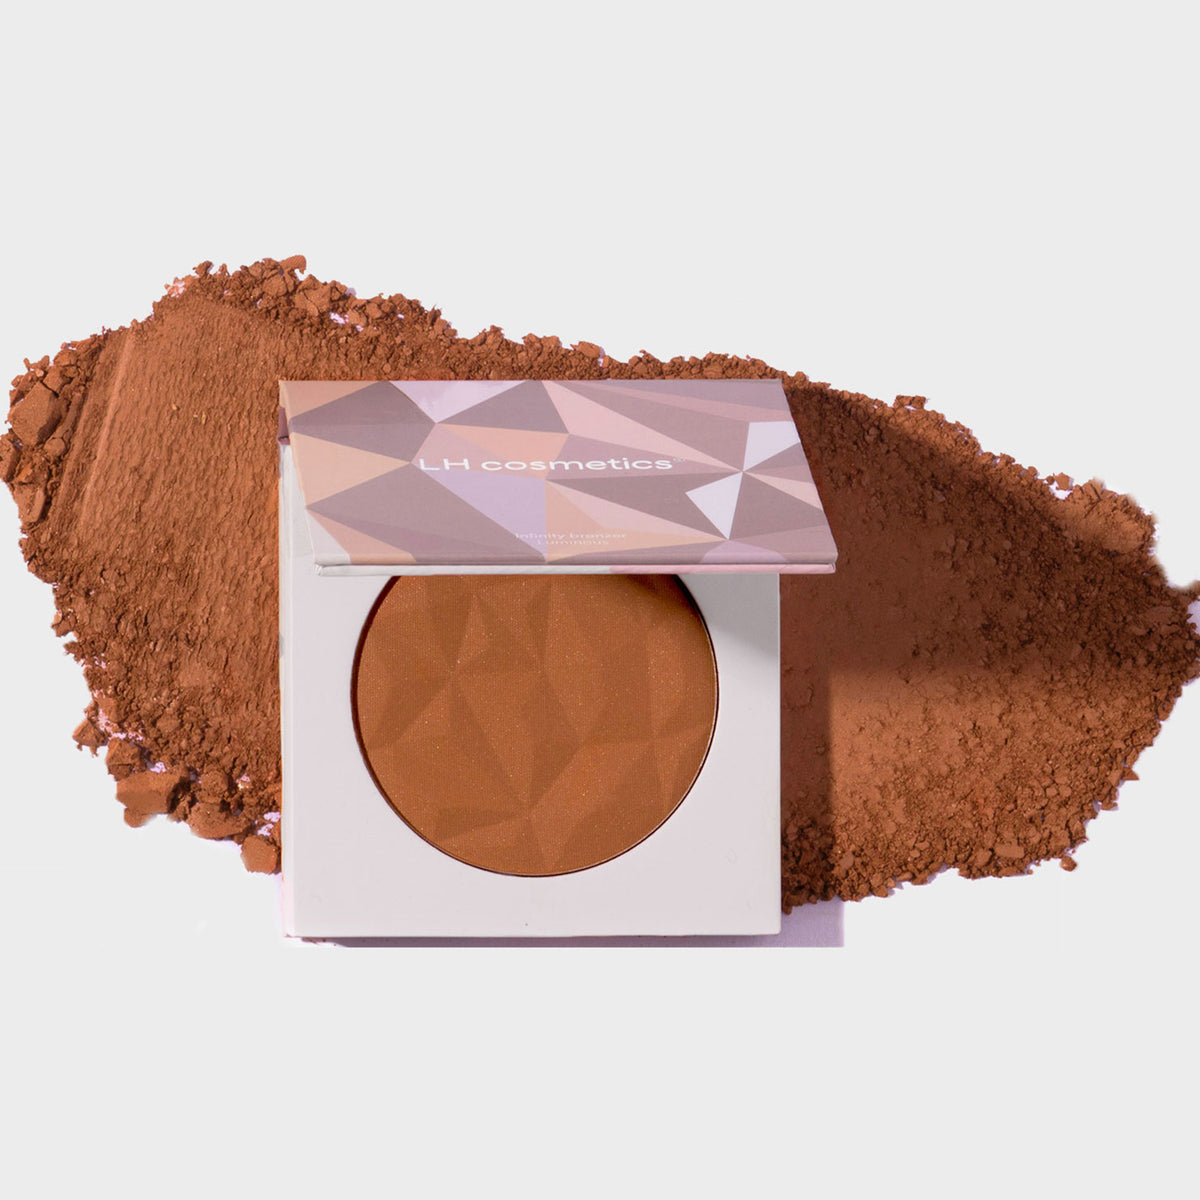 LH Cosmetics | Infinity Bronzer Forever